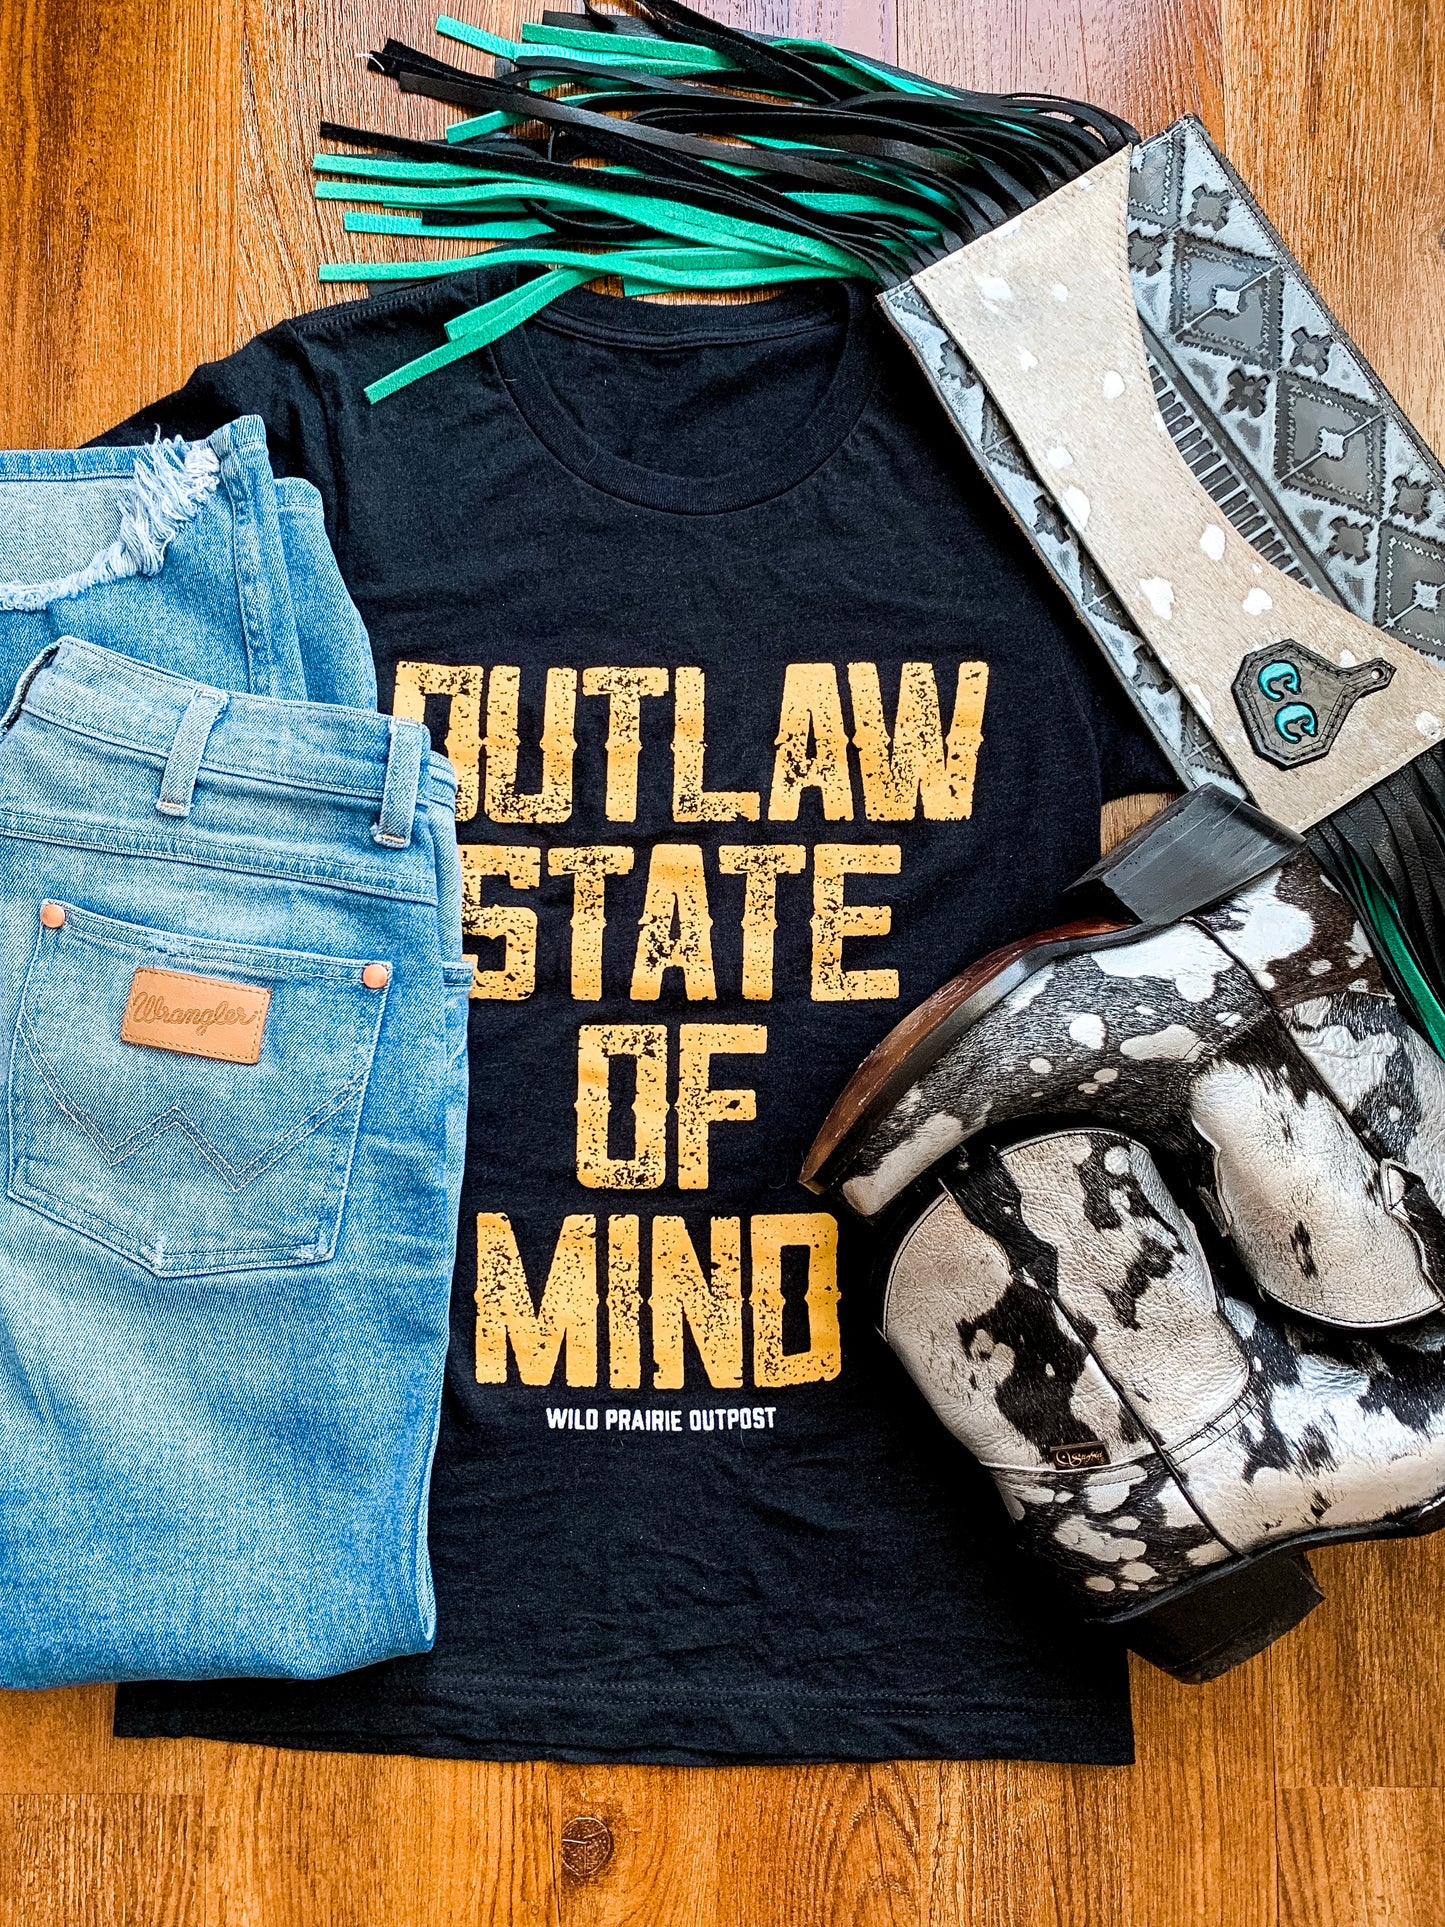 Outlaw State of Mind Tee